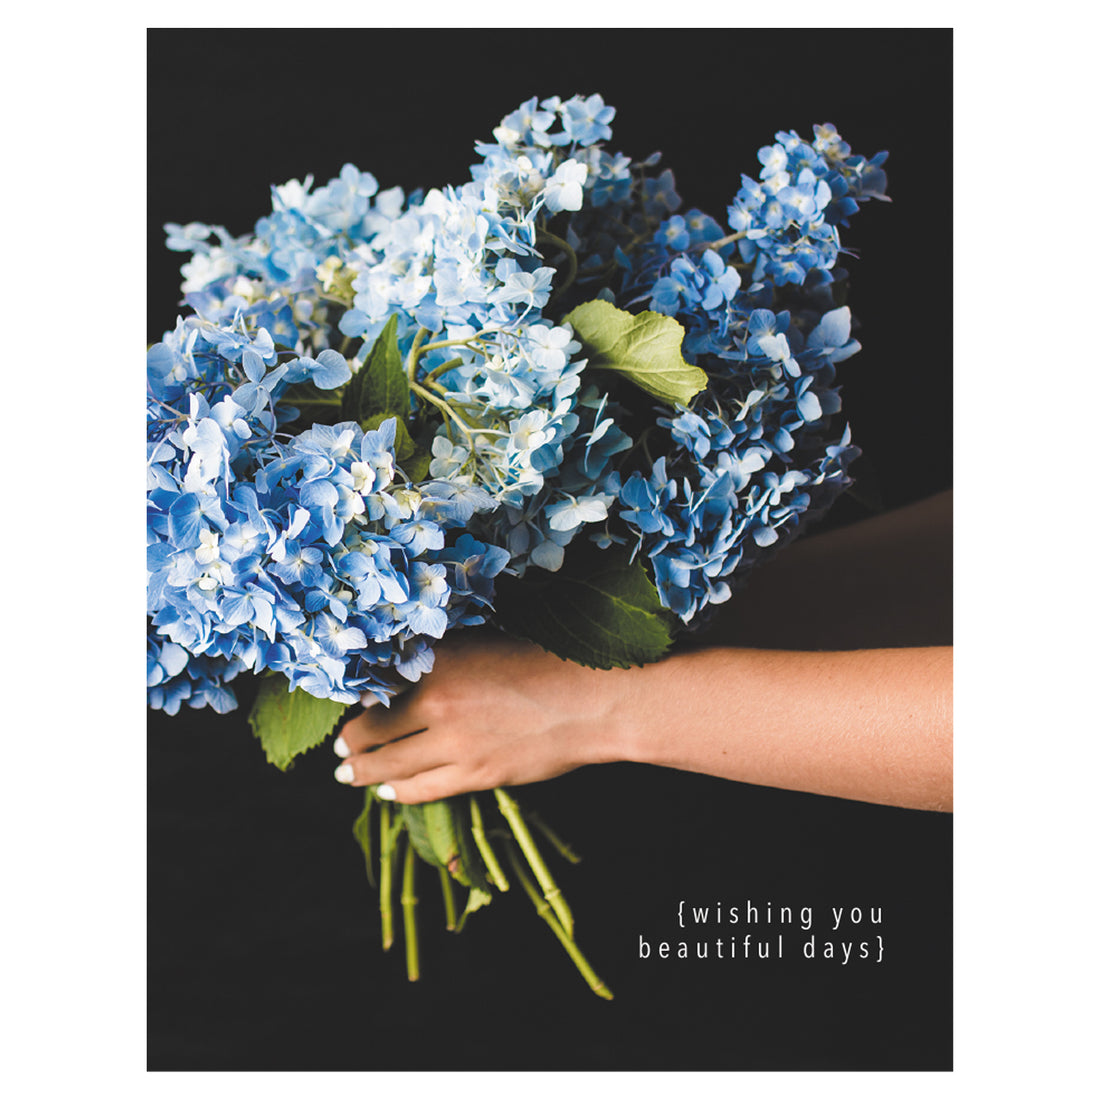 A photo of a pair of manicured hands holding a bouquet of blue hydrangeas on a black background, with &quot;wishing you beautiful days&quot; printed in the lower right corner in white.